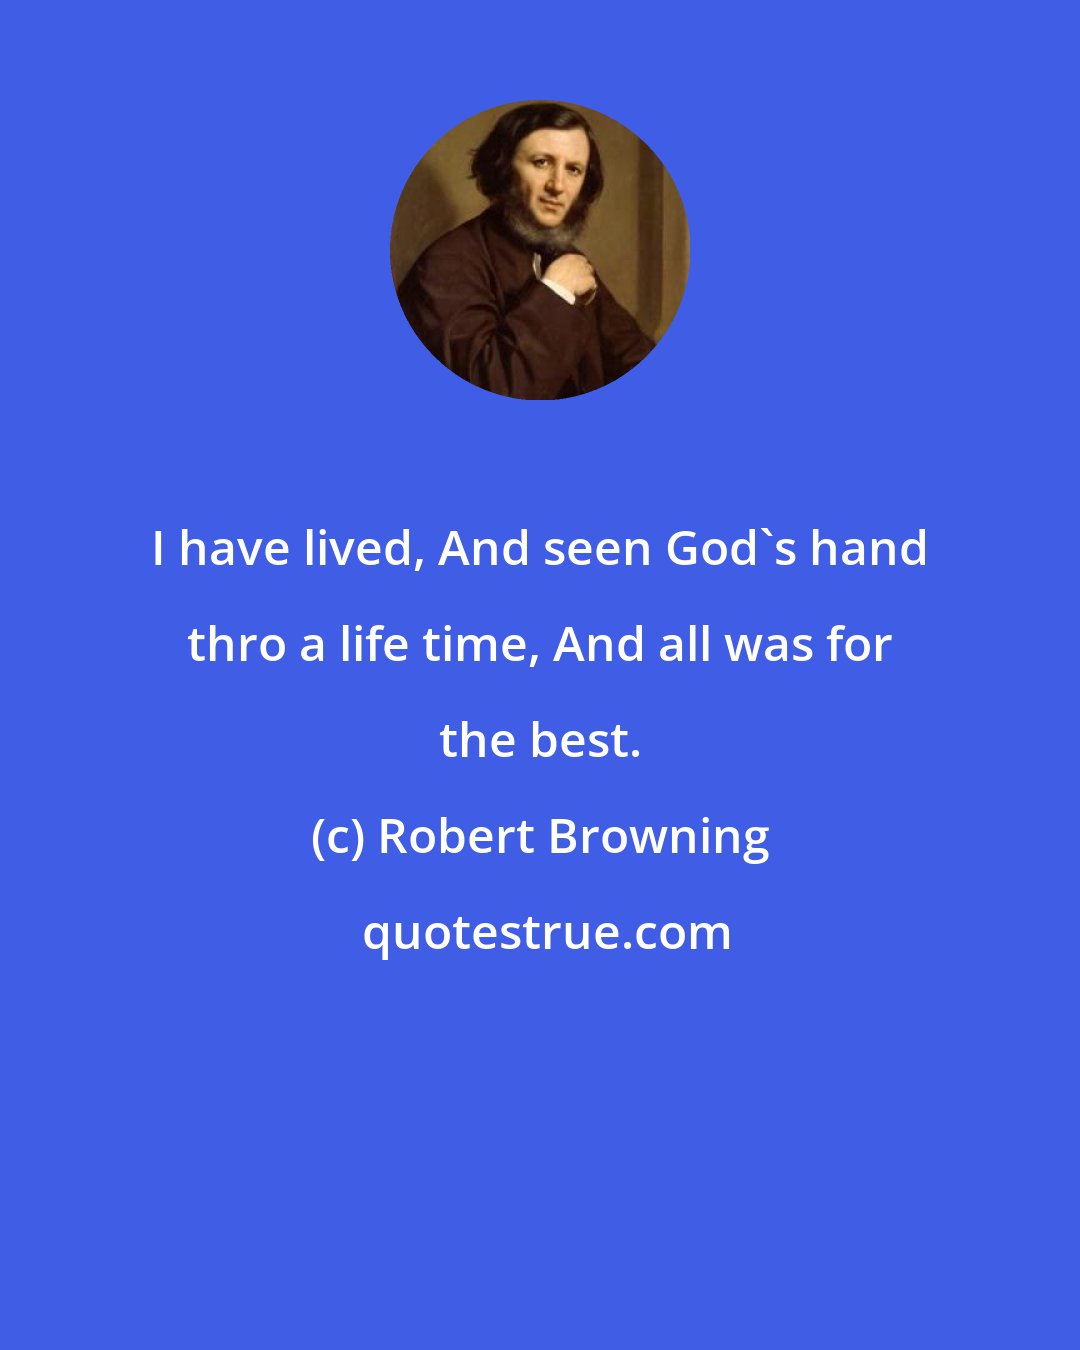 Robert Browning: I have lived, And seen God's hand thro a life time, And all was for the best.